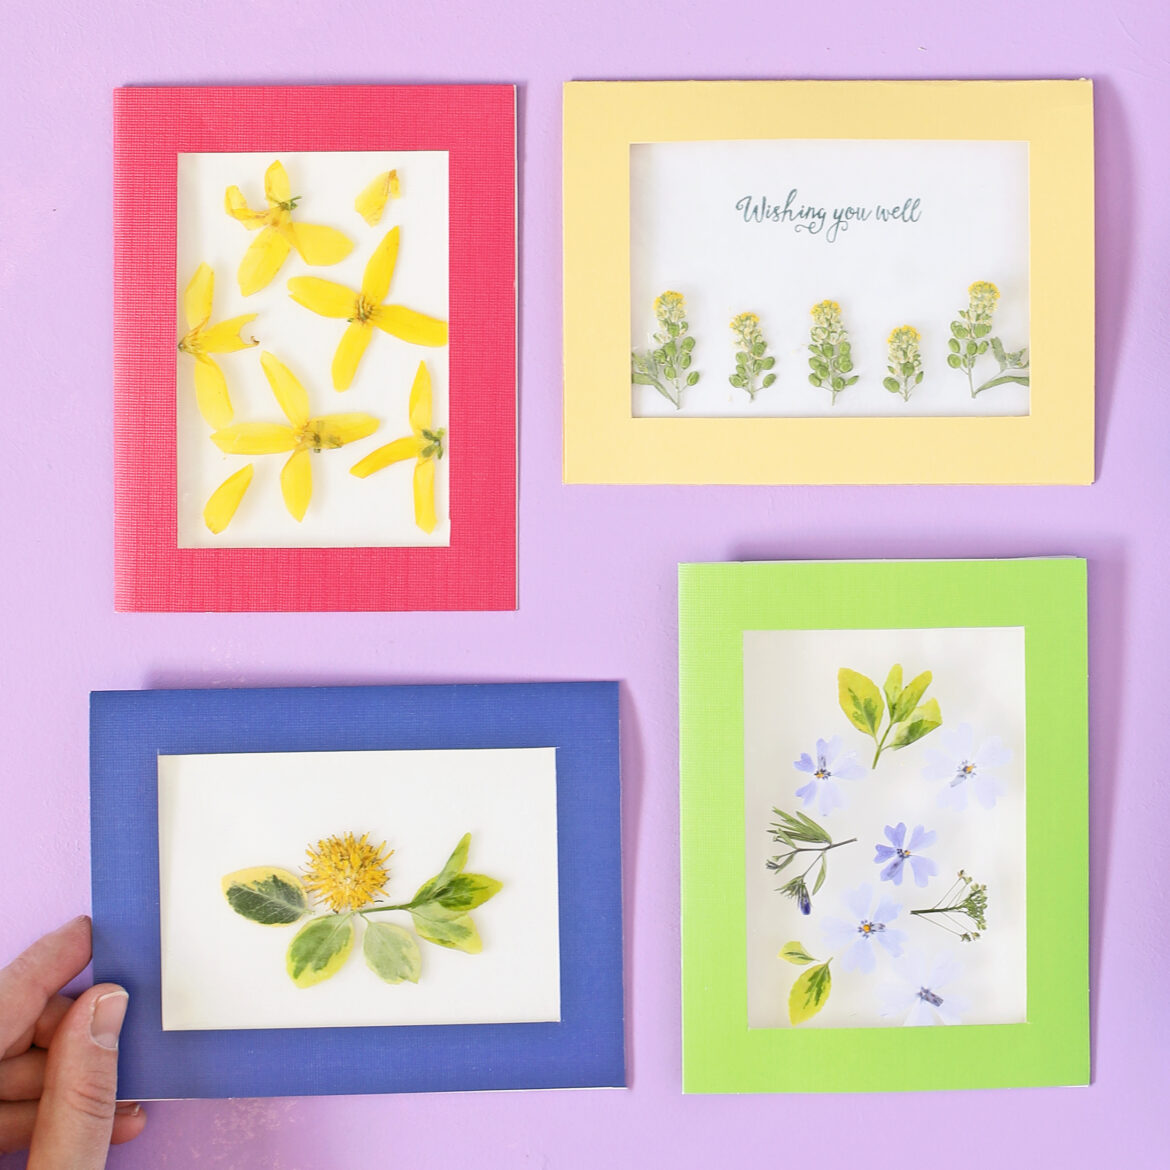 Four cards made of colorful paper and pressed flowers on clear EasyLiner.